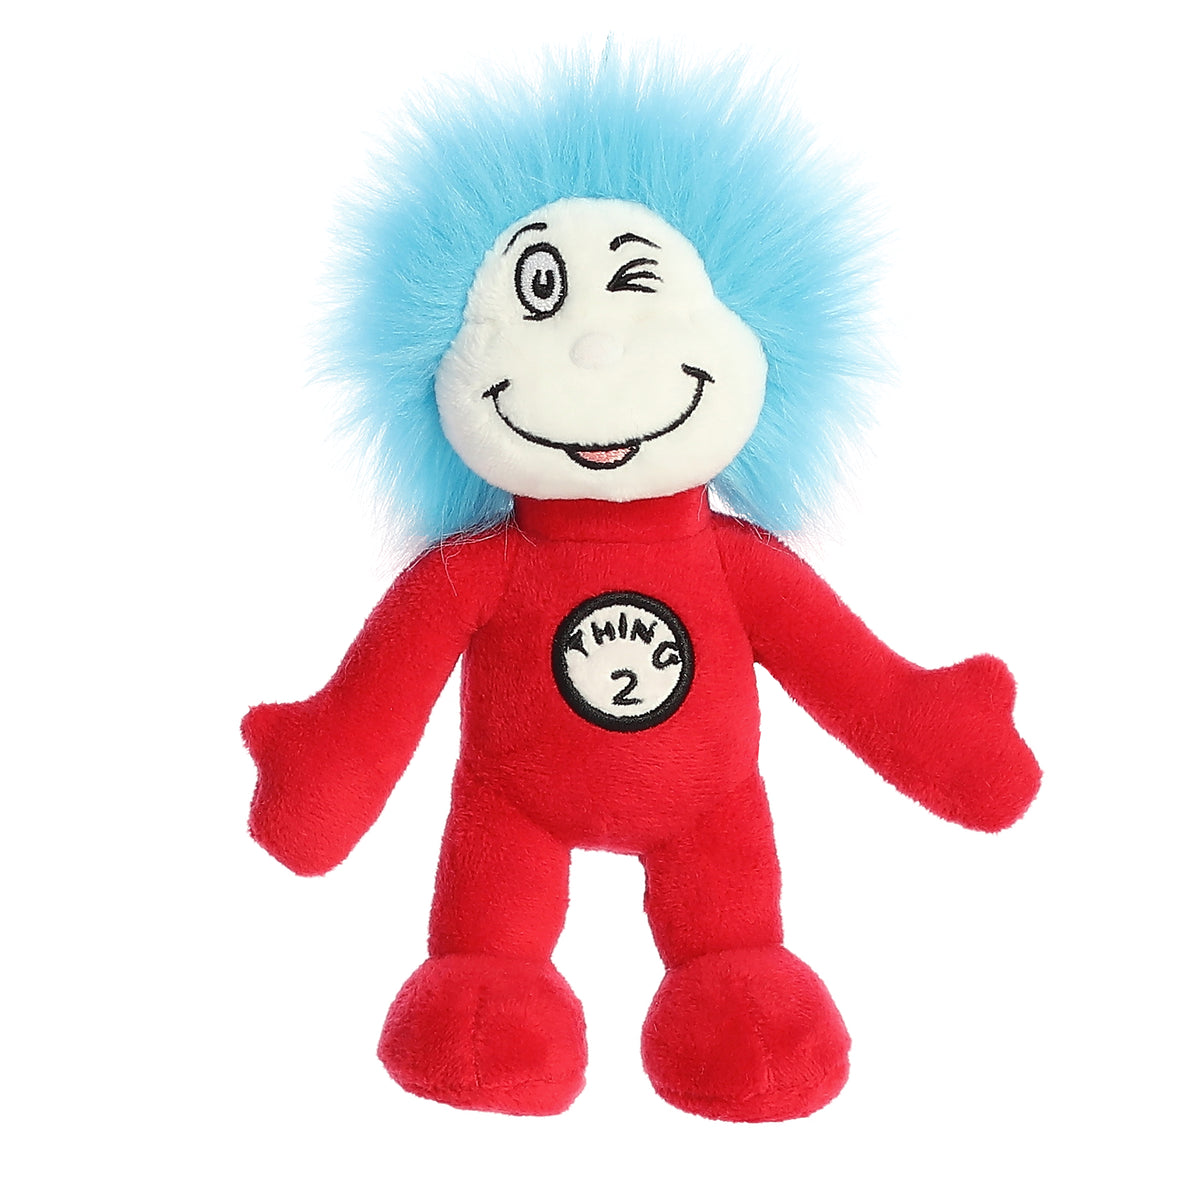 A playful Thing 2 Dr Seuss plush toy armature with the iconic red onesie, fluffy bright blue hair, and Thing 2 embroidery.